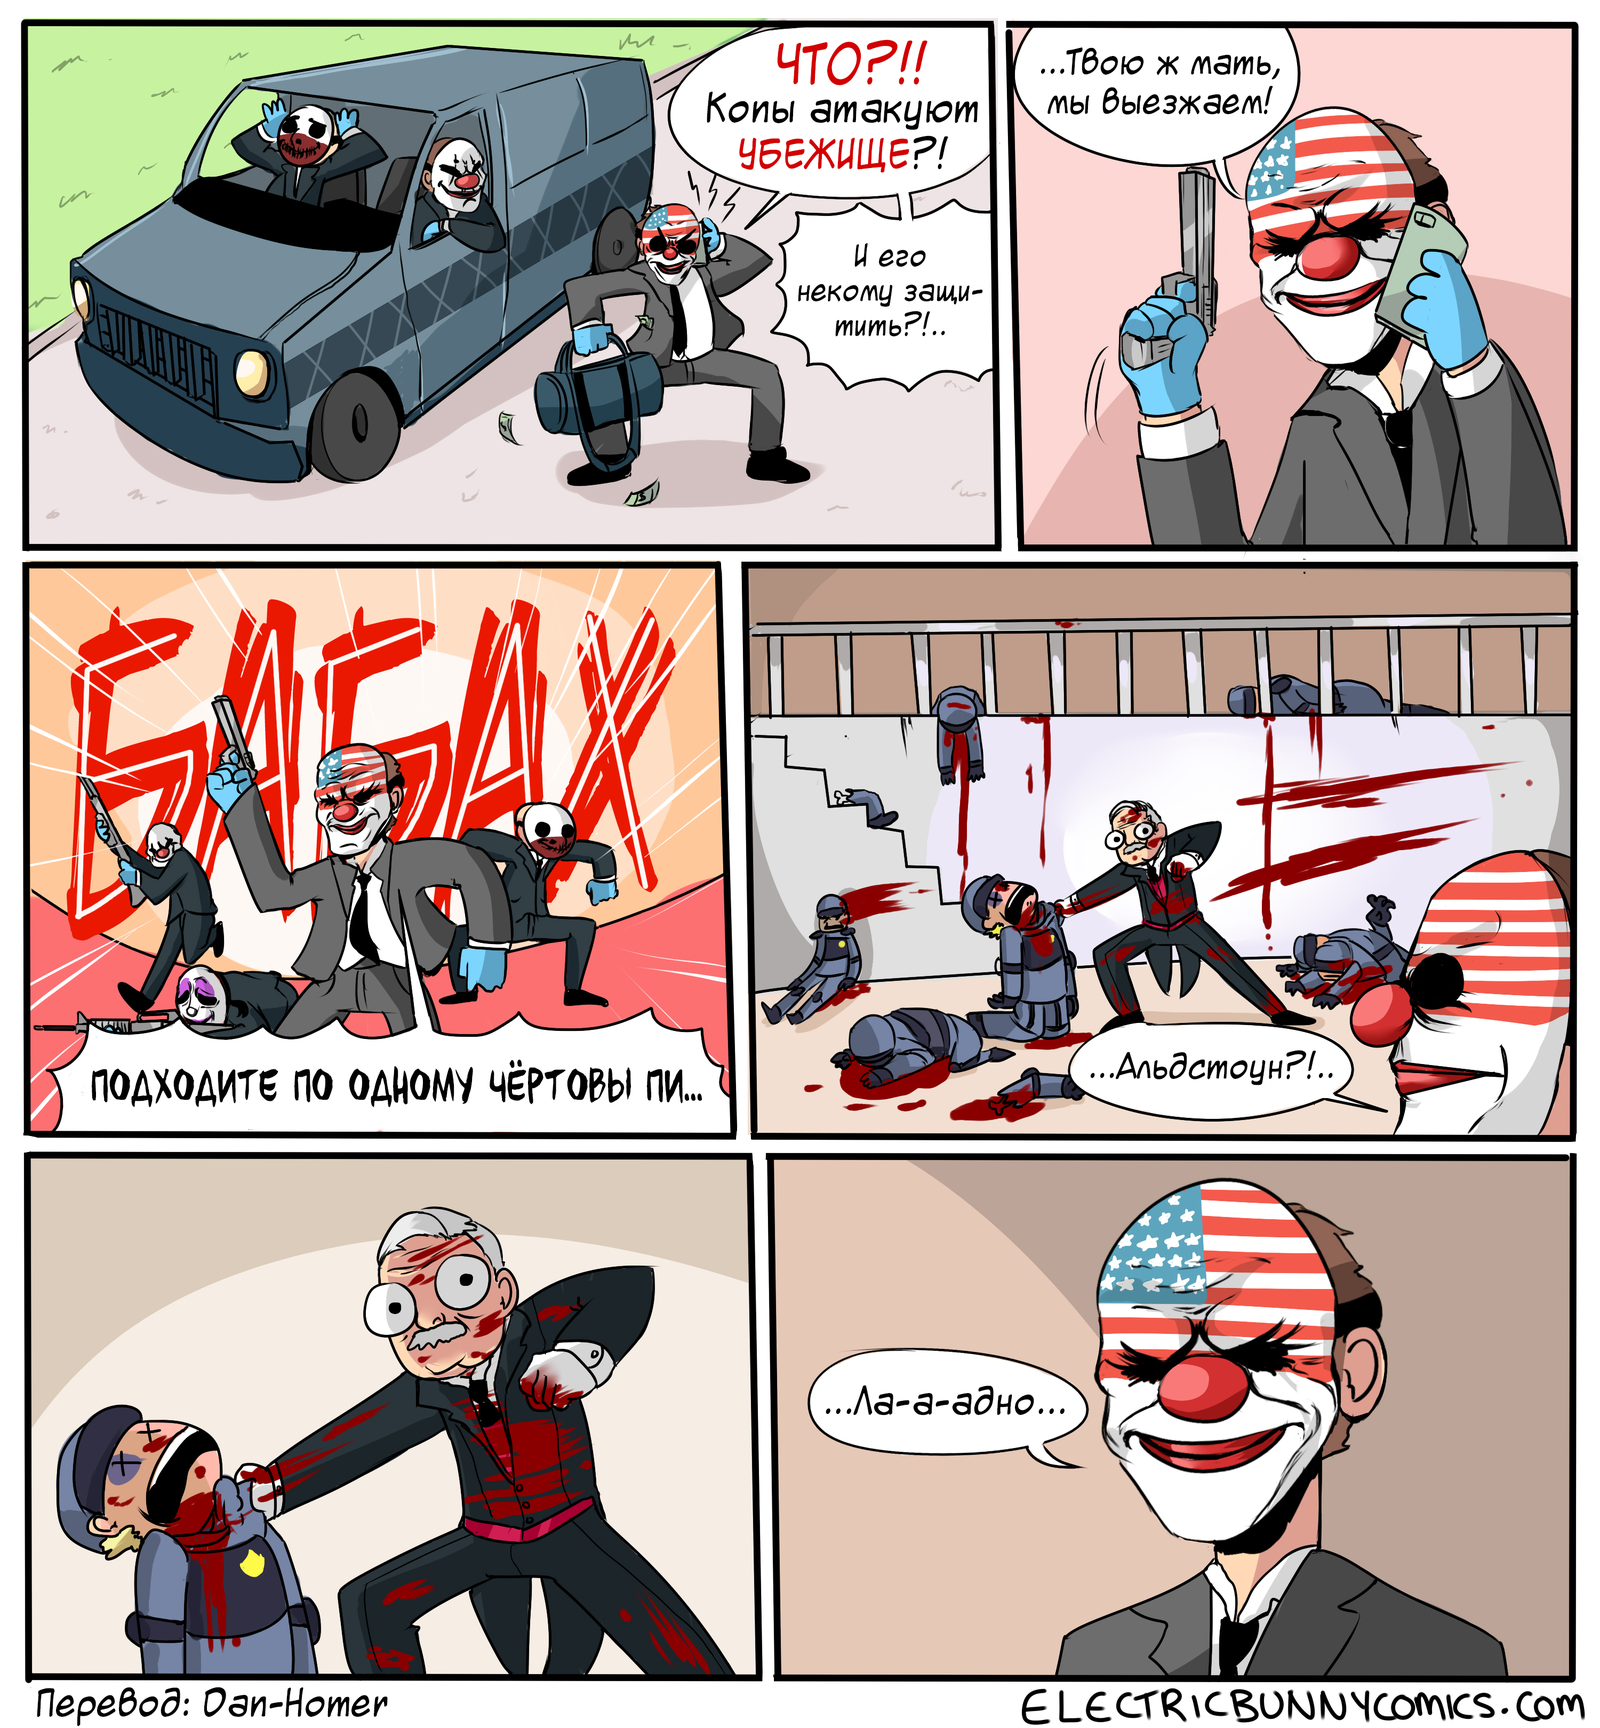 The cops are attacking the Vault! - Payday 2, Comics, Games, Overkill, Electricbunnycomics